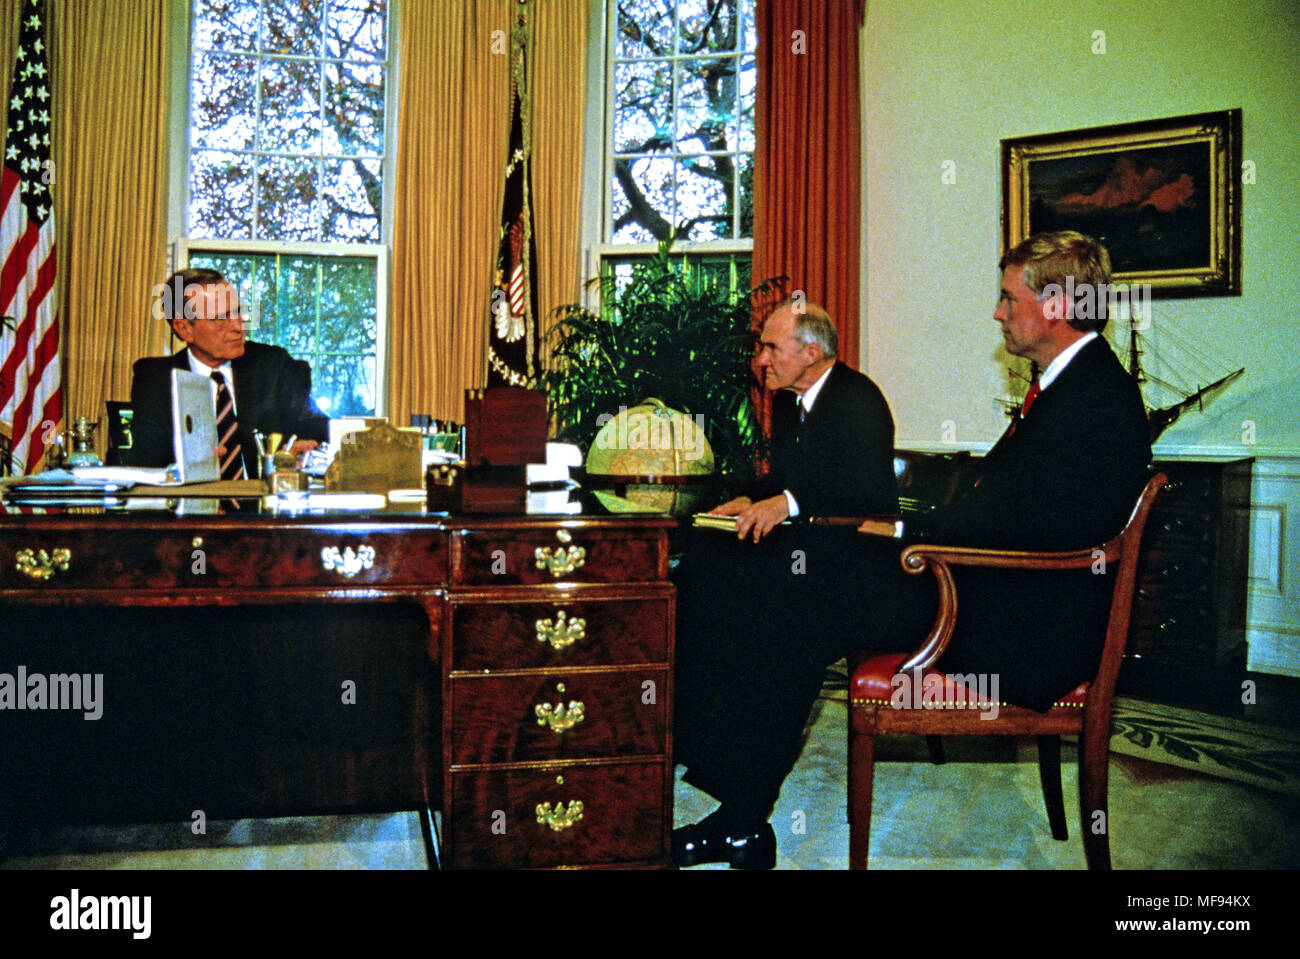 Washington, District of Columbia, USA. 17th May, 2013. United States President George H.W. Bush meets senior advisors during a briefing on the upcoming Malta Summit with Soviet President Mikhail Gorbachev (not pictured) in the Oval Office of the White House in Washington, DC on November 28, 1889. From left to right: President Bush; National Security Advisor Brent Scowcroft; and U.S. Vice President Dan Quayle.Credit: Arnie Sachs/CNP Credit: Arnie Sachs/CNP/ZUMAPRESS.com/Alamy Live News Stock Photo